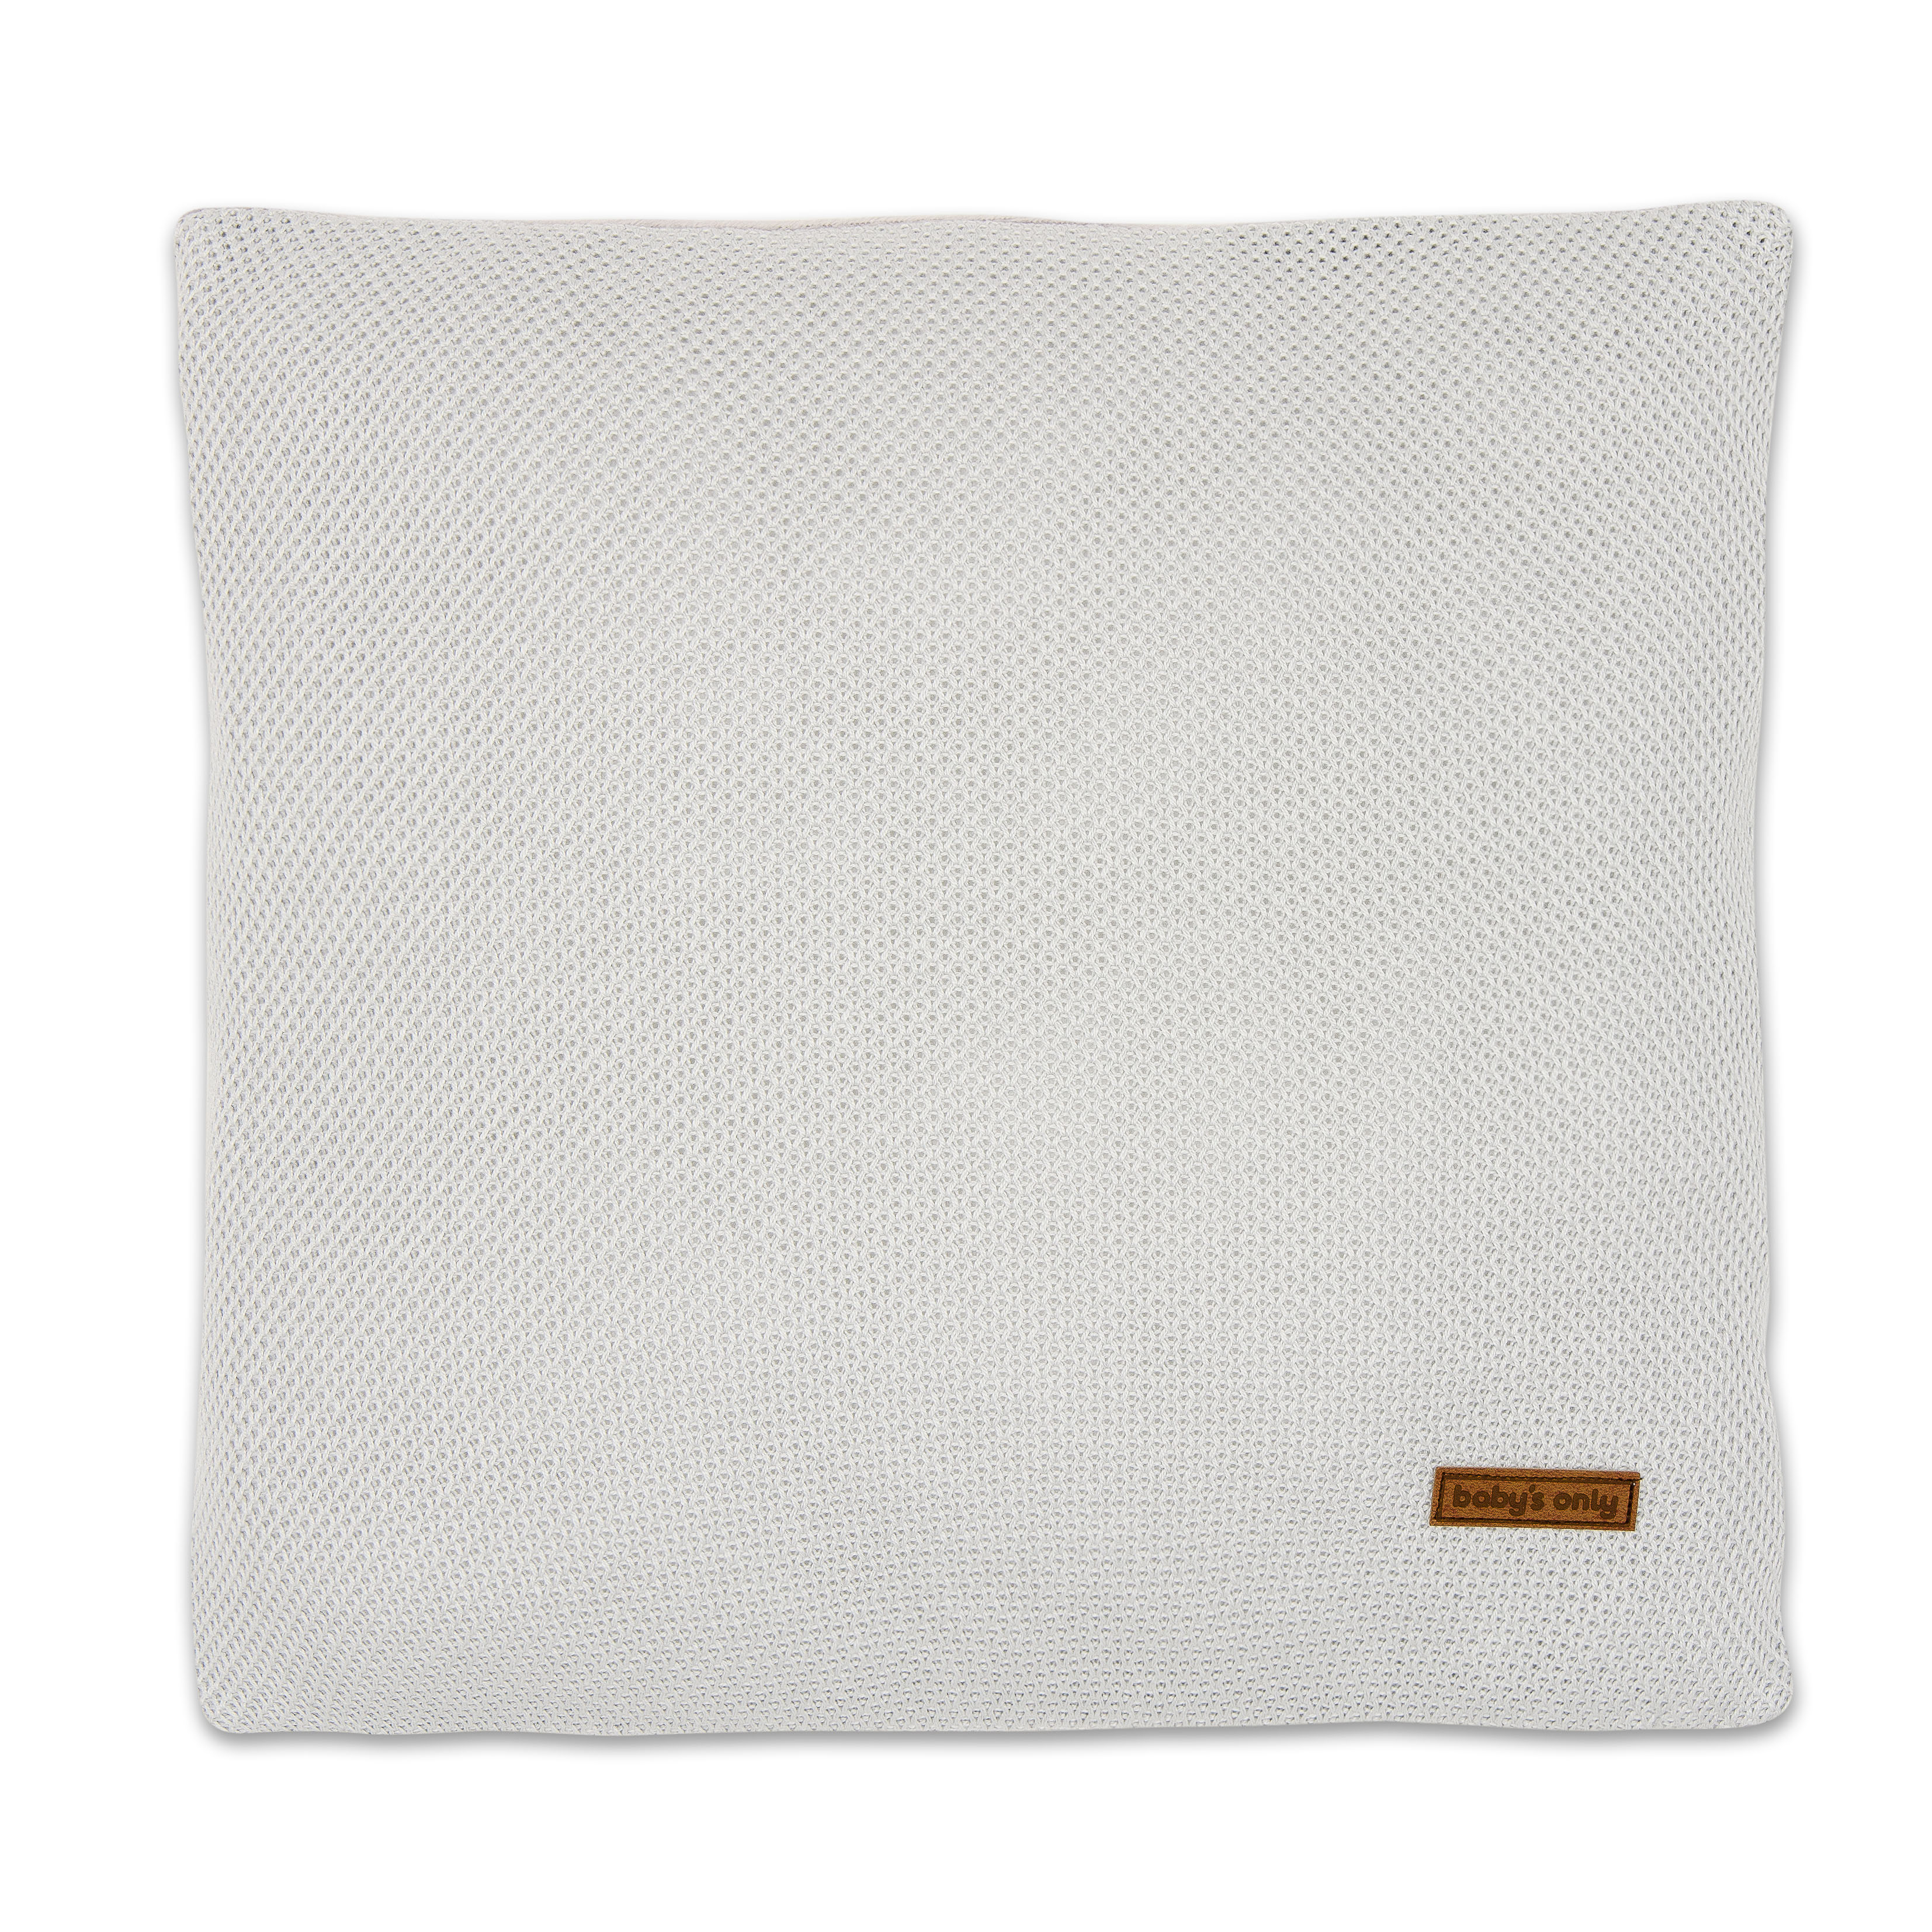 Pillow Classic silver-grey - 40x40